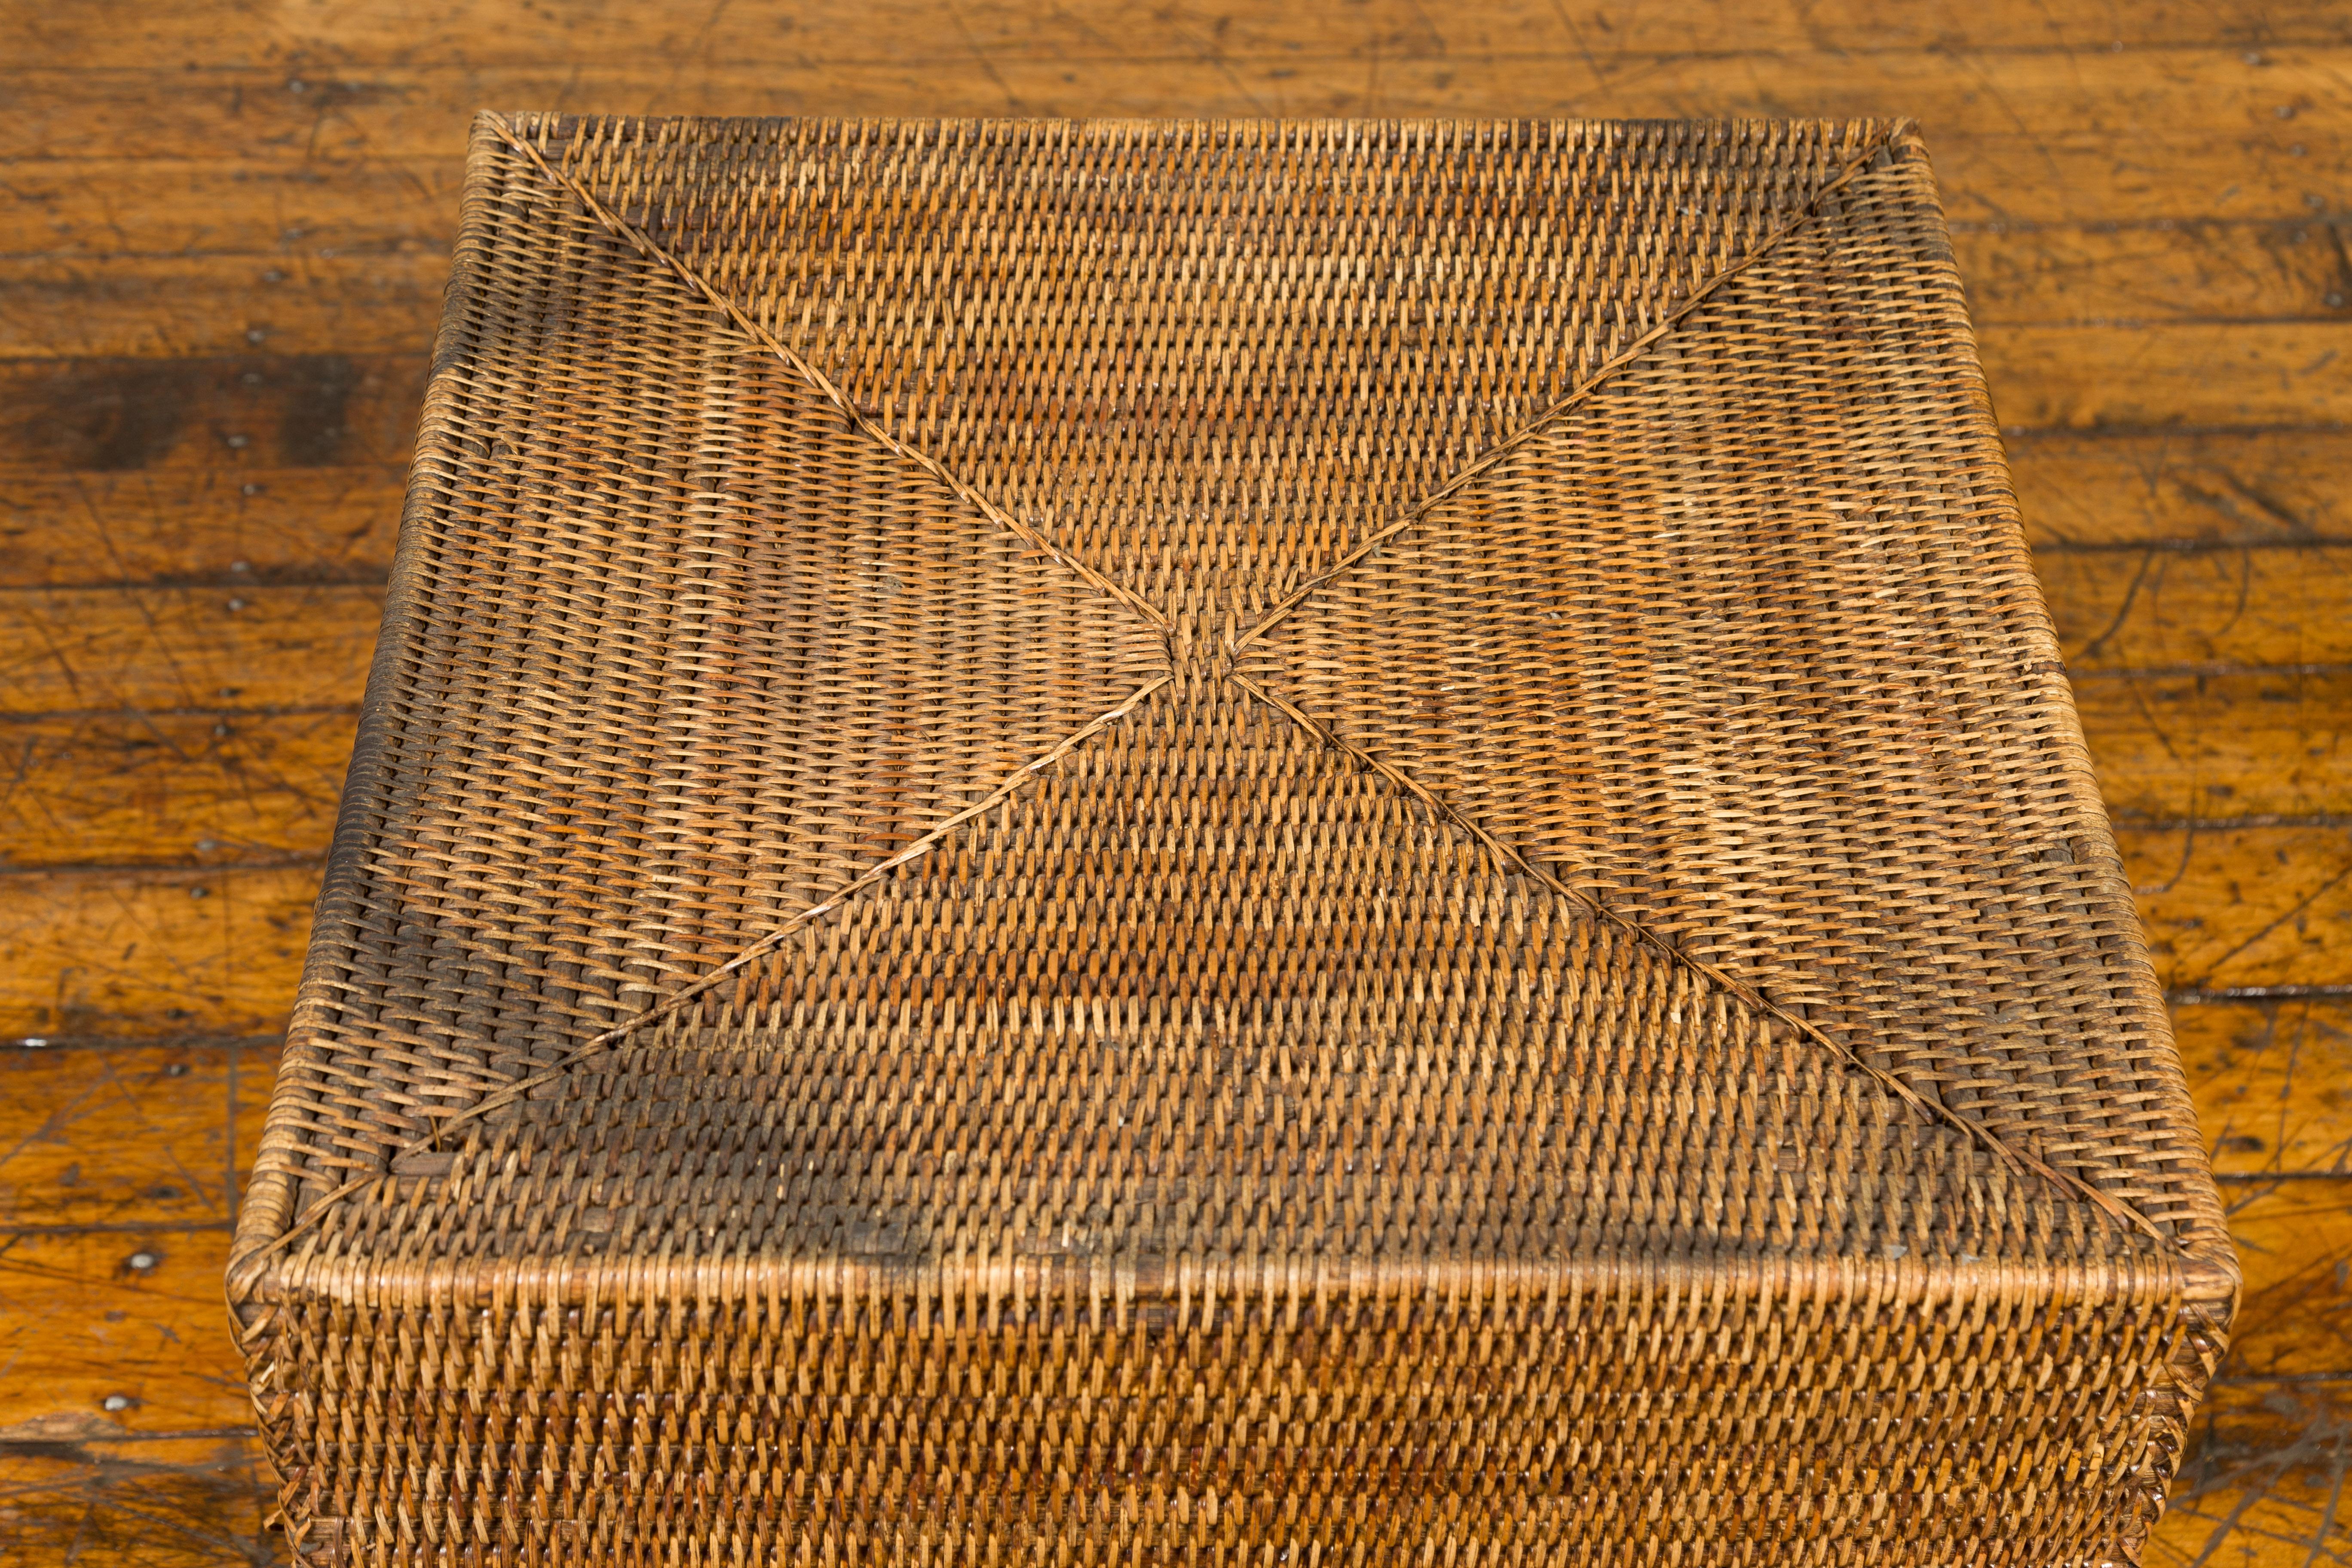 Rustic Burmese Vintage Square Shaped Rattan Basket with Weathered Patina In Good Condition For Sale In Yonkers, NY